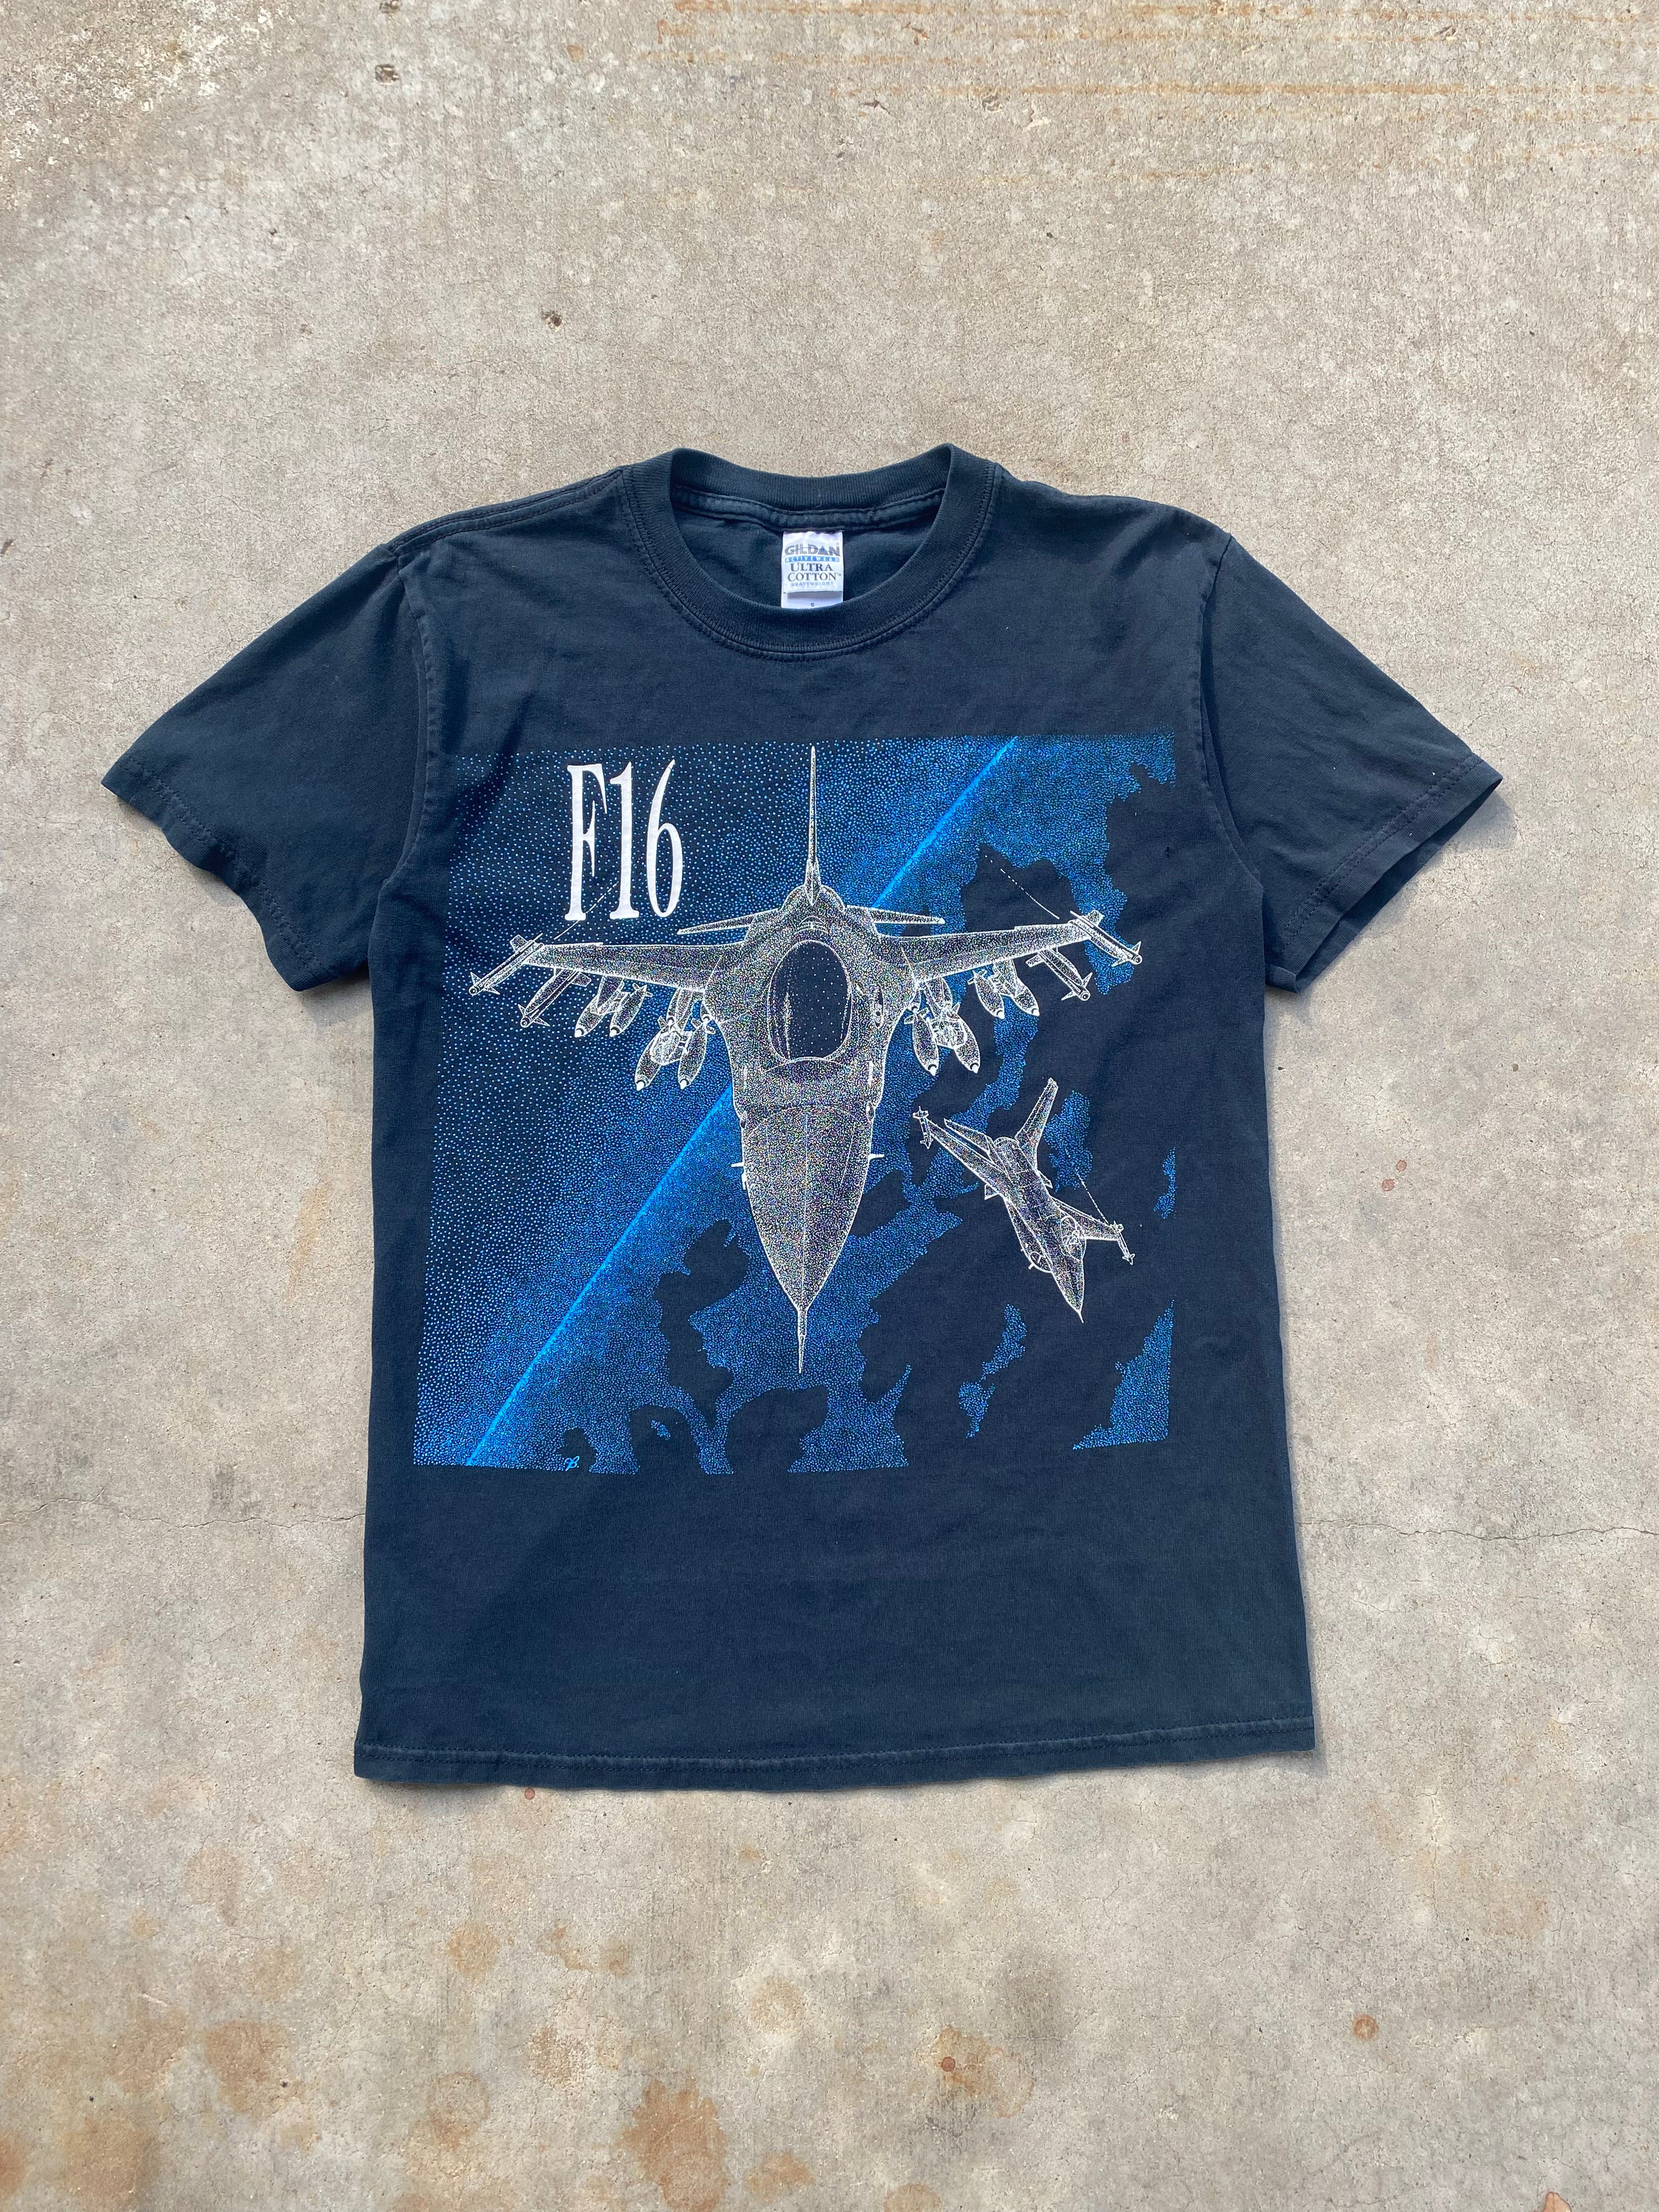 1990s F16 Faded T-Shirt (S)